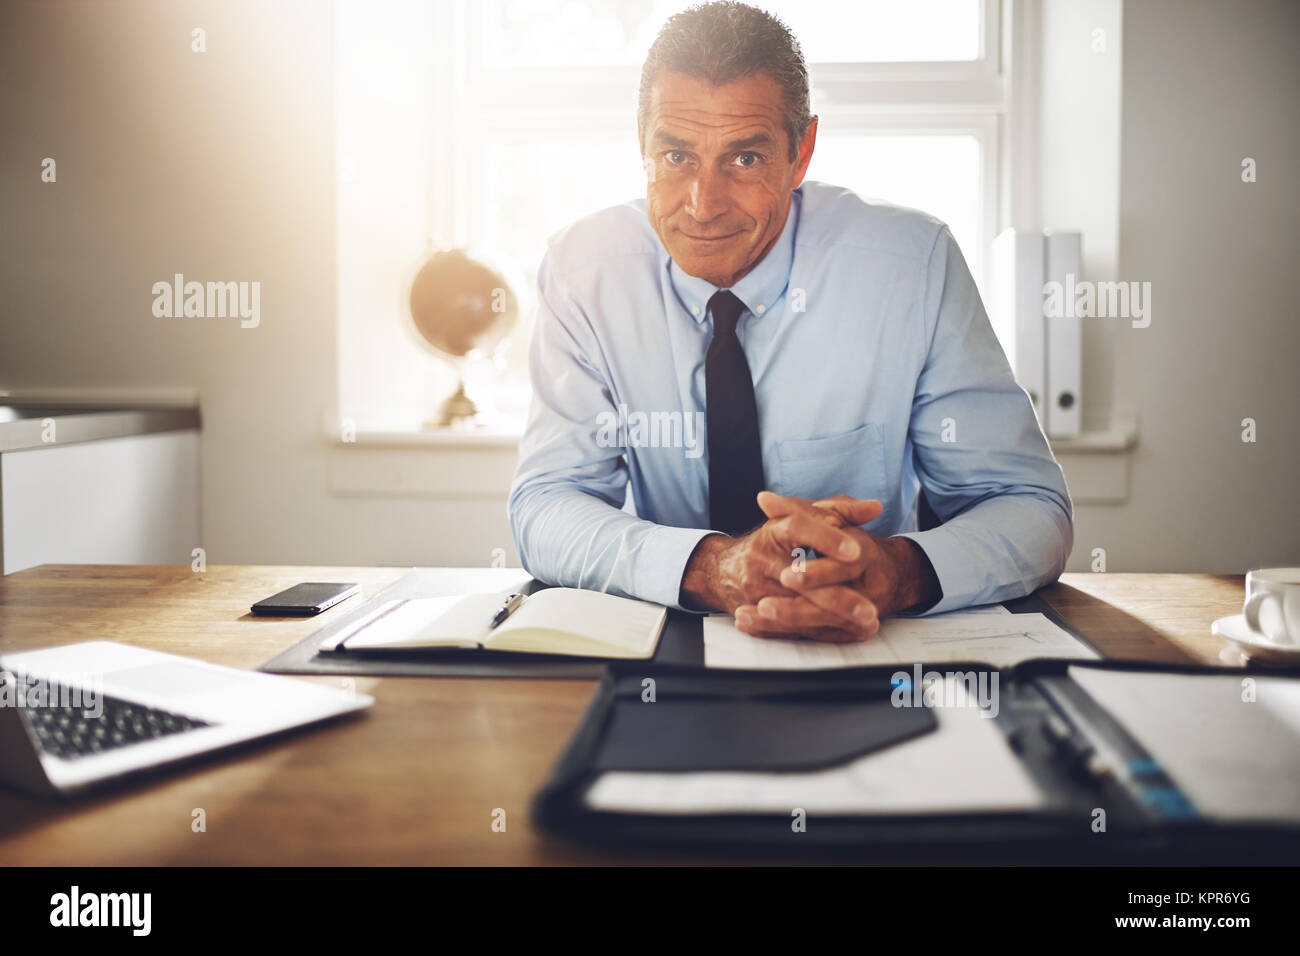 Smiling mature businessman wearing a shirt and tie sitting confidently alone at his desk in an office Stock Photo